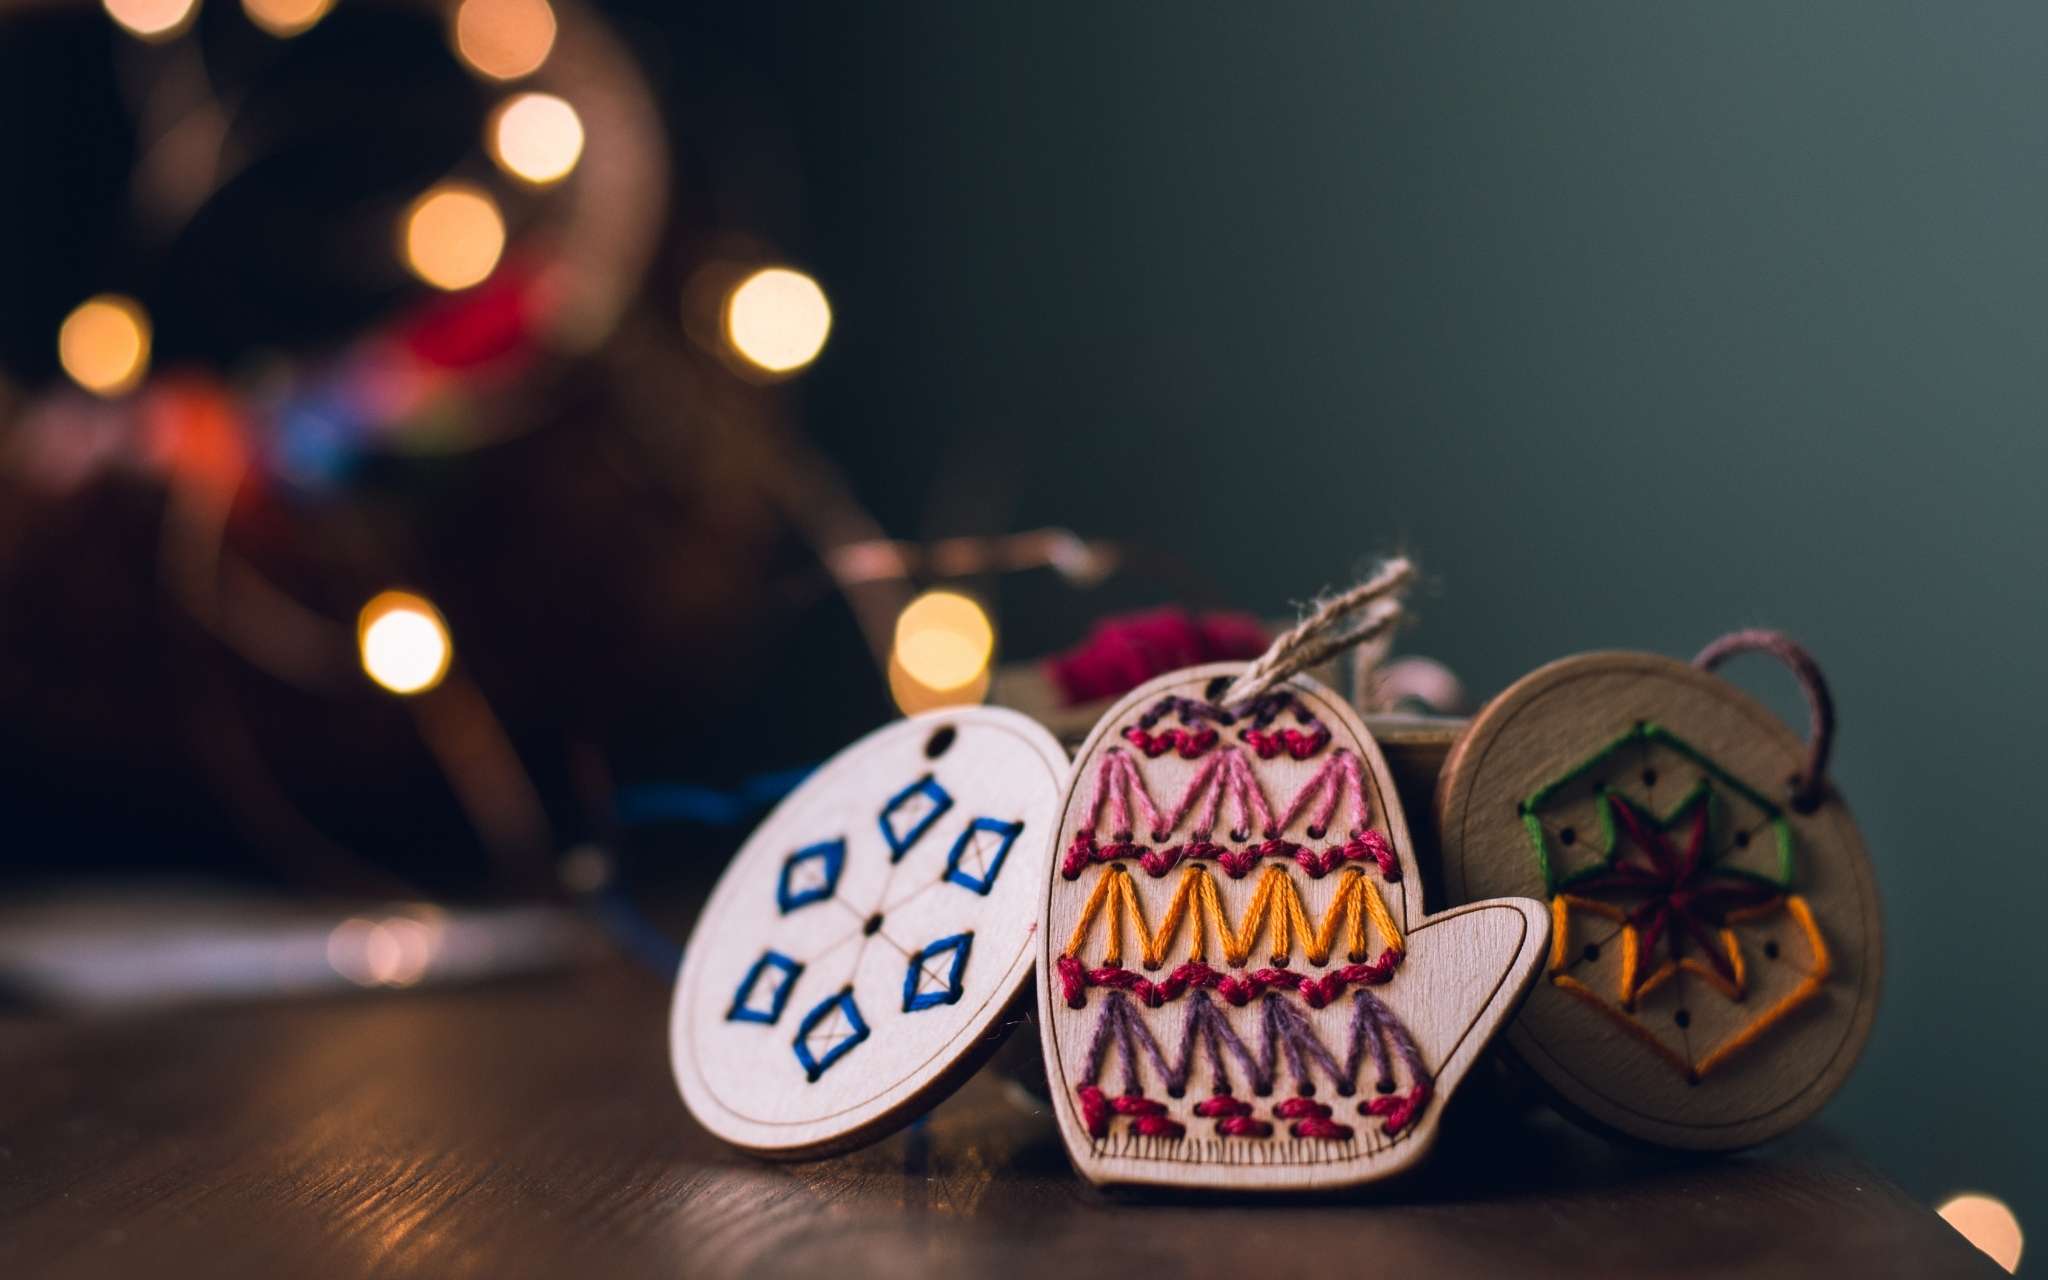 Wooden hanging ornaments that have been hand stitched in bright colours are gathered on a wooden surface, with fairy lights and a tree blurred behind.